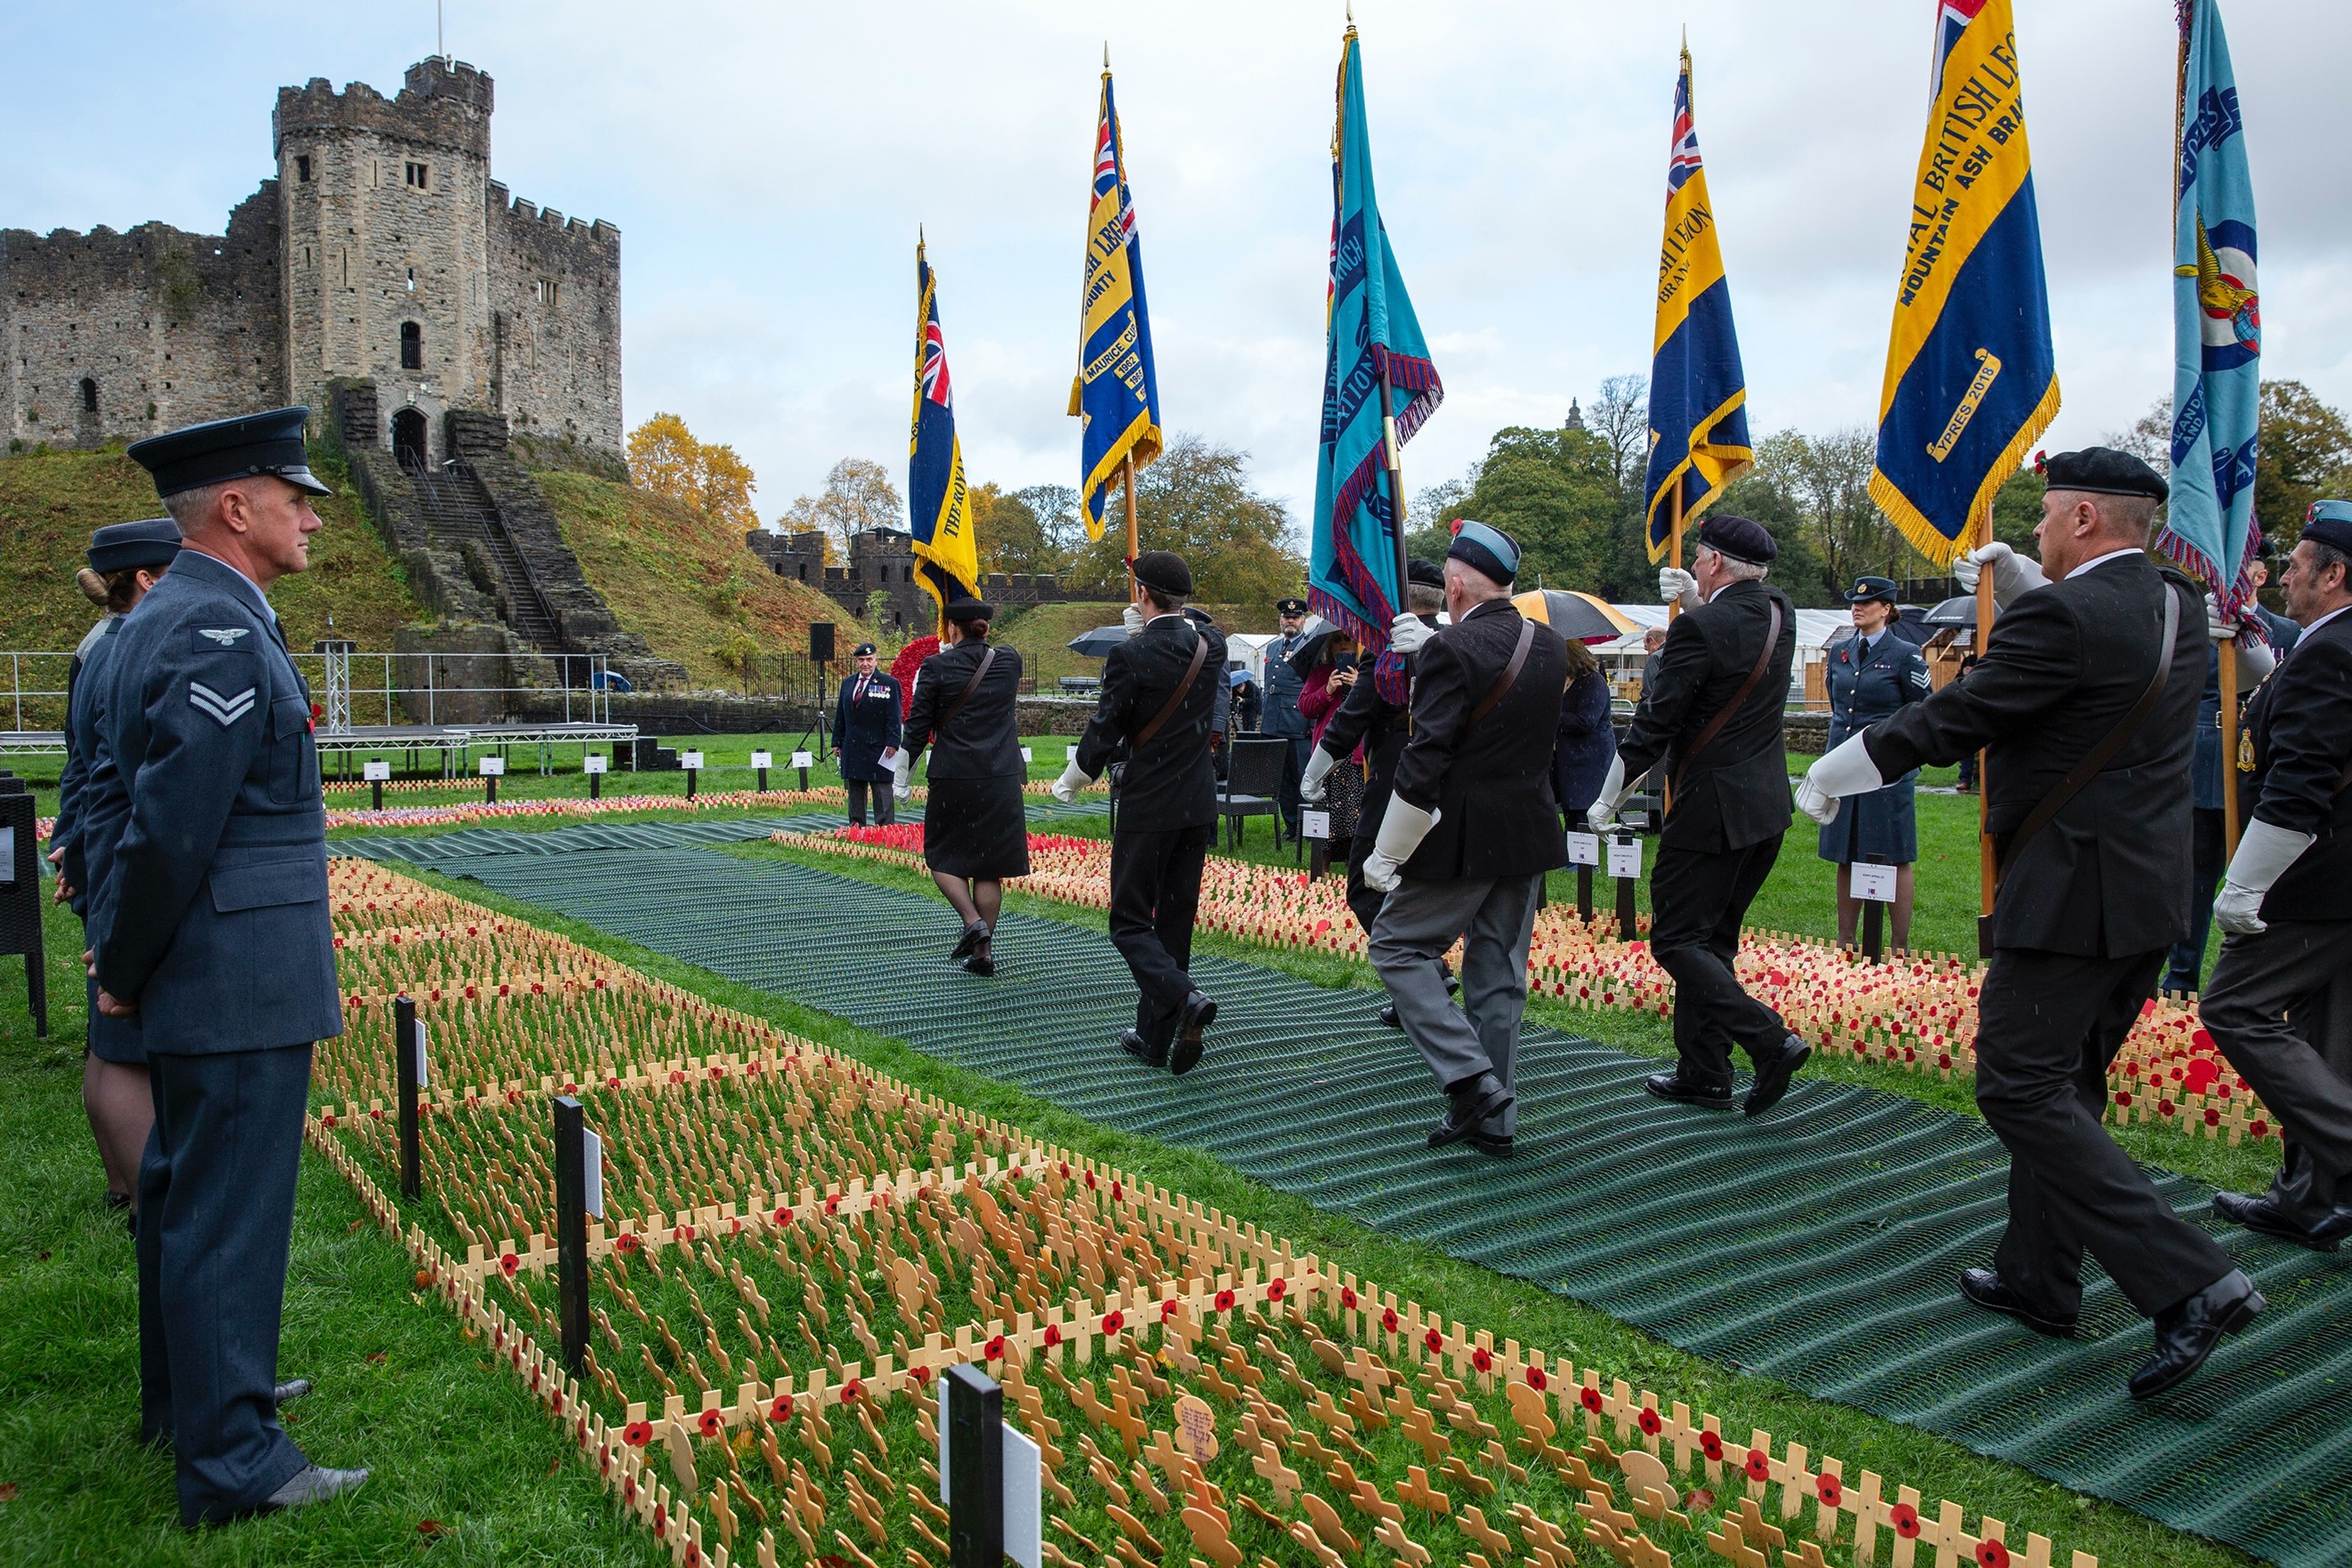 Image shows military personnel march with flags between rows of a poppy crosses towards castle.